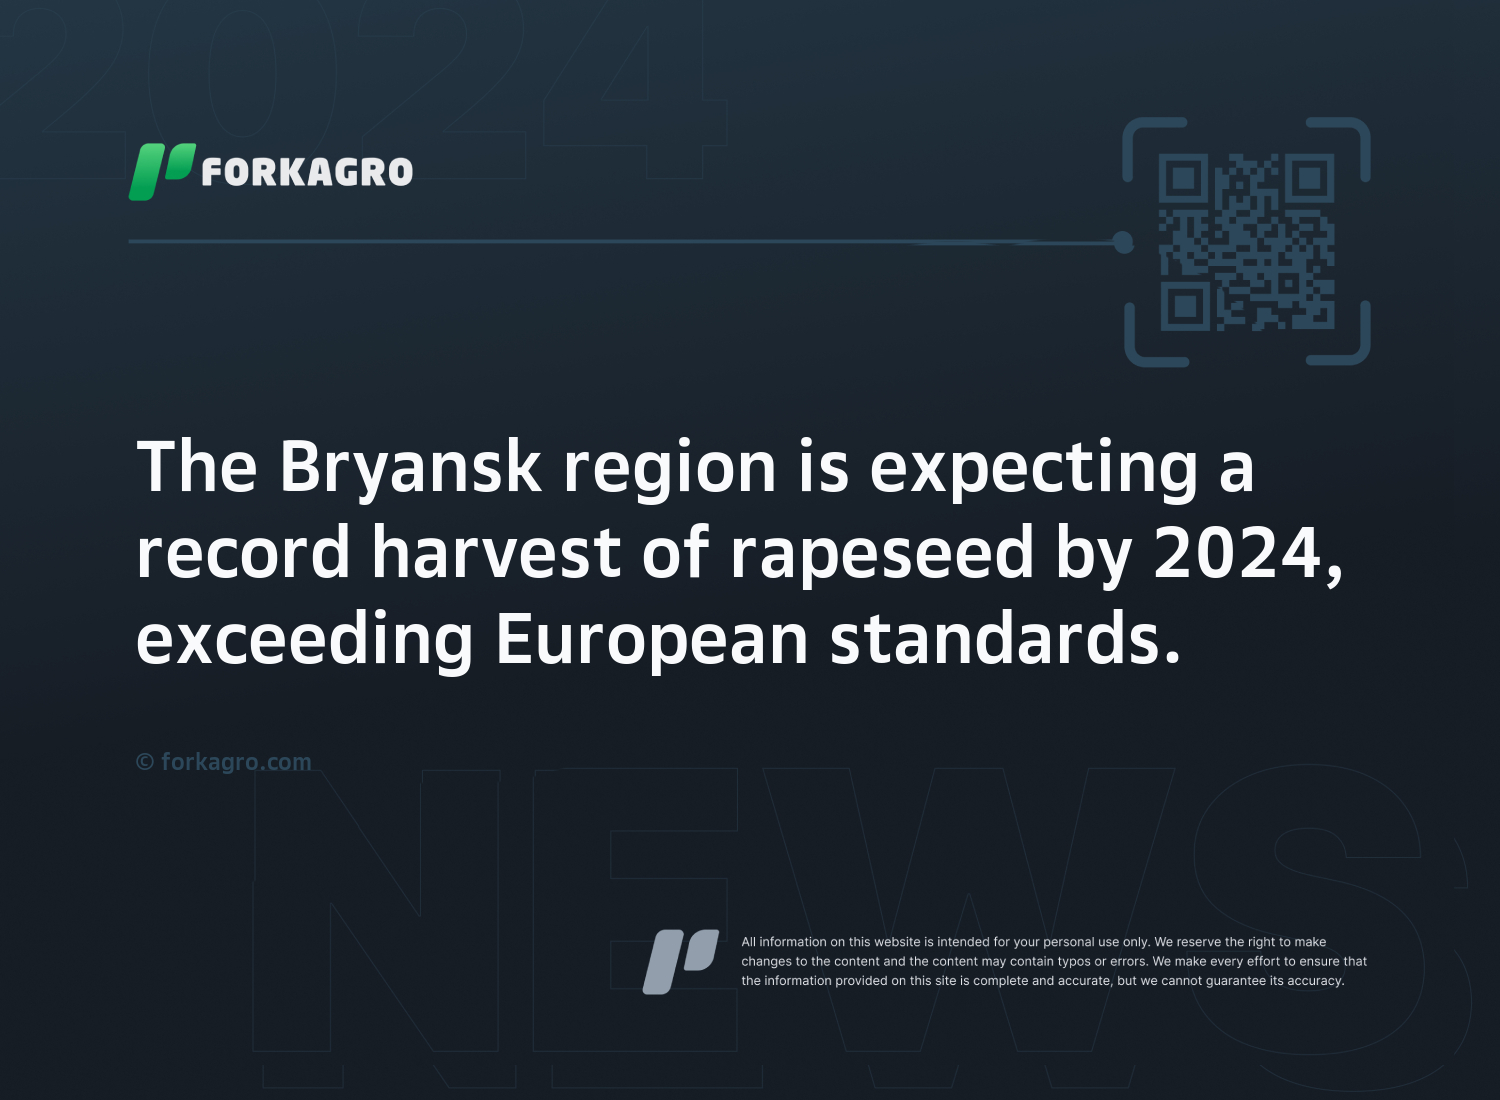 The Bryansk region is expecting a record harvest of rapeseed by 2024, exceeding European standards.